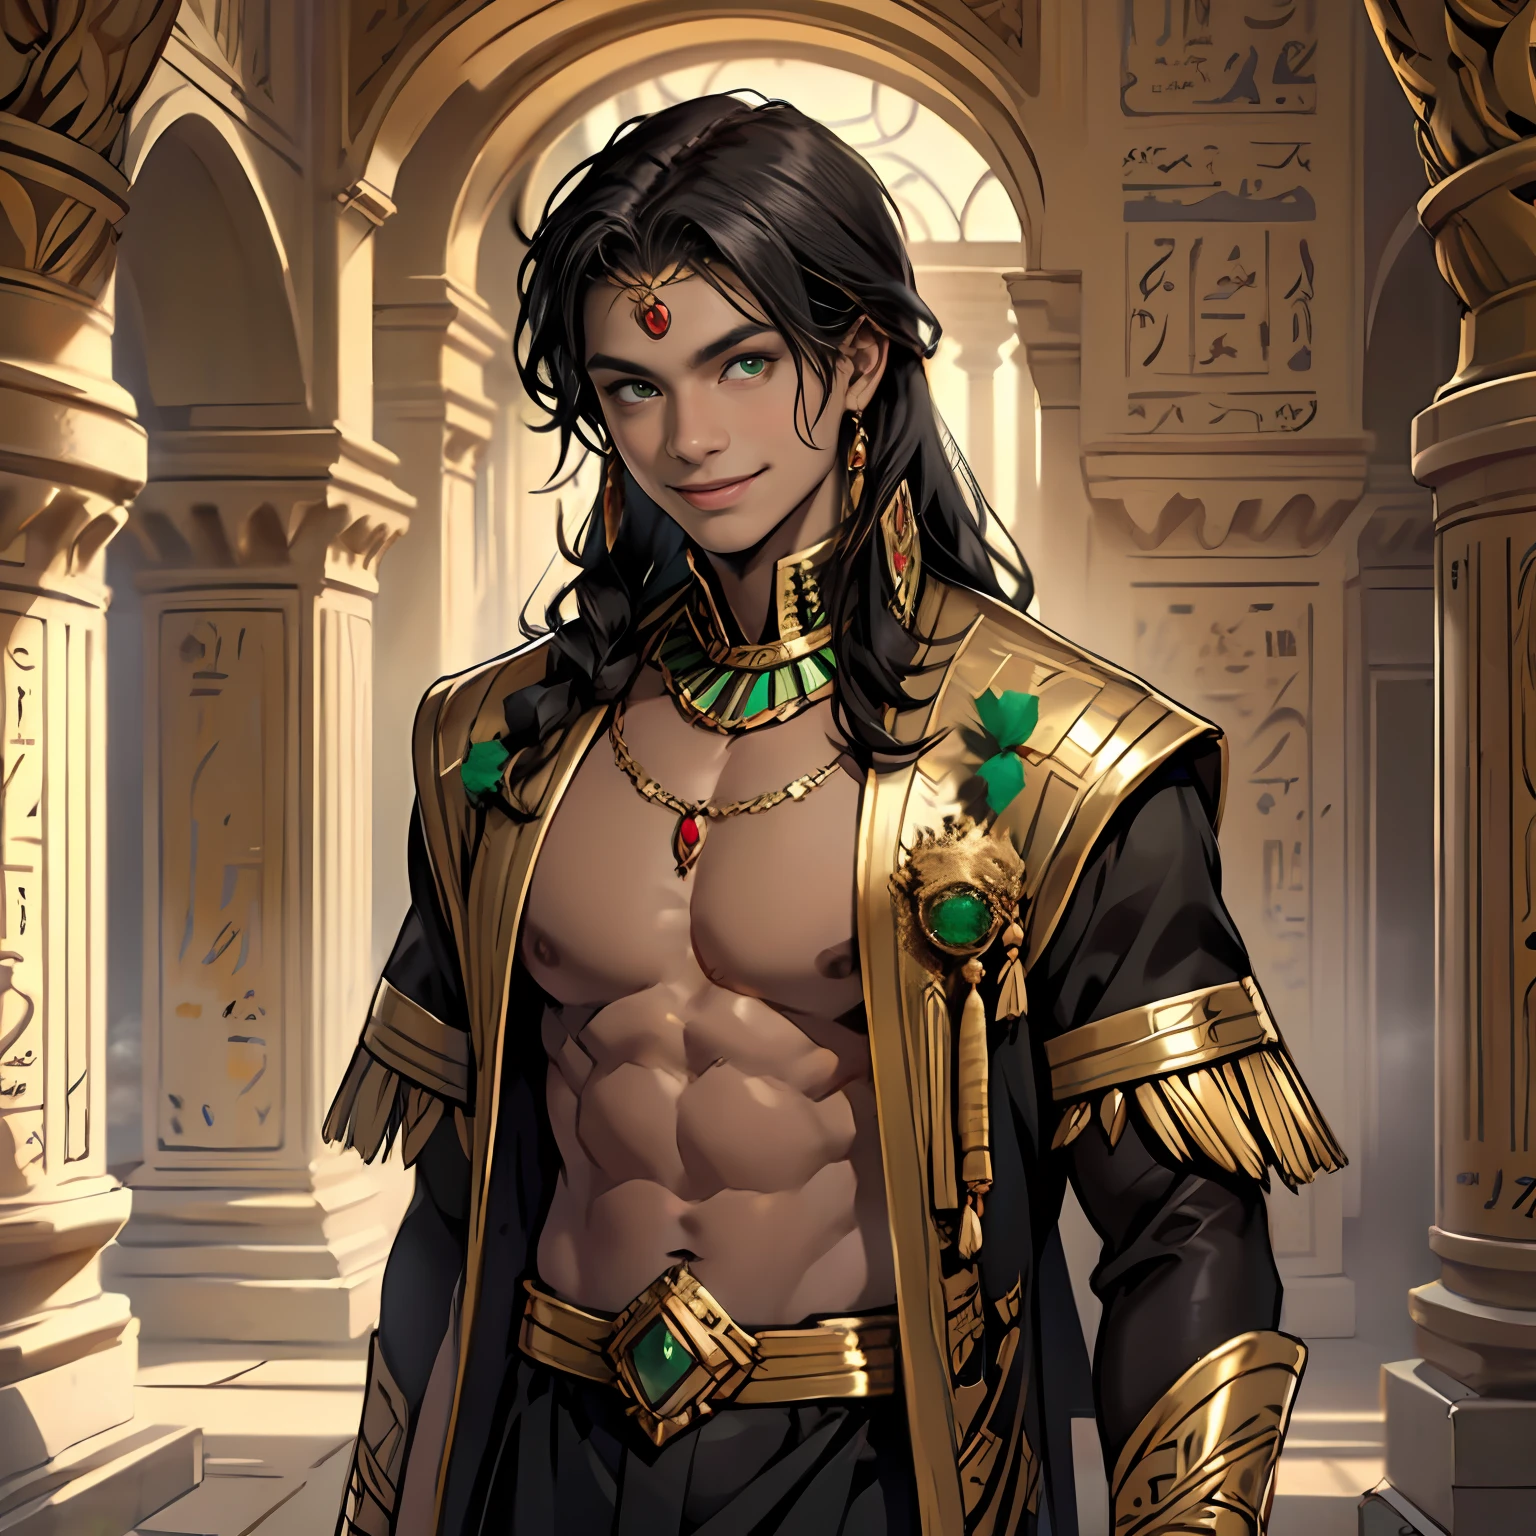 15-year-old male boy walks smiling through the palaces of ancient Egypt black hair brown skin green eyes elegant black clothes with gold with bare chest wears red gold jewelry